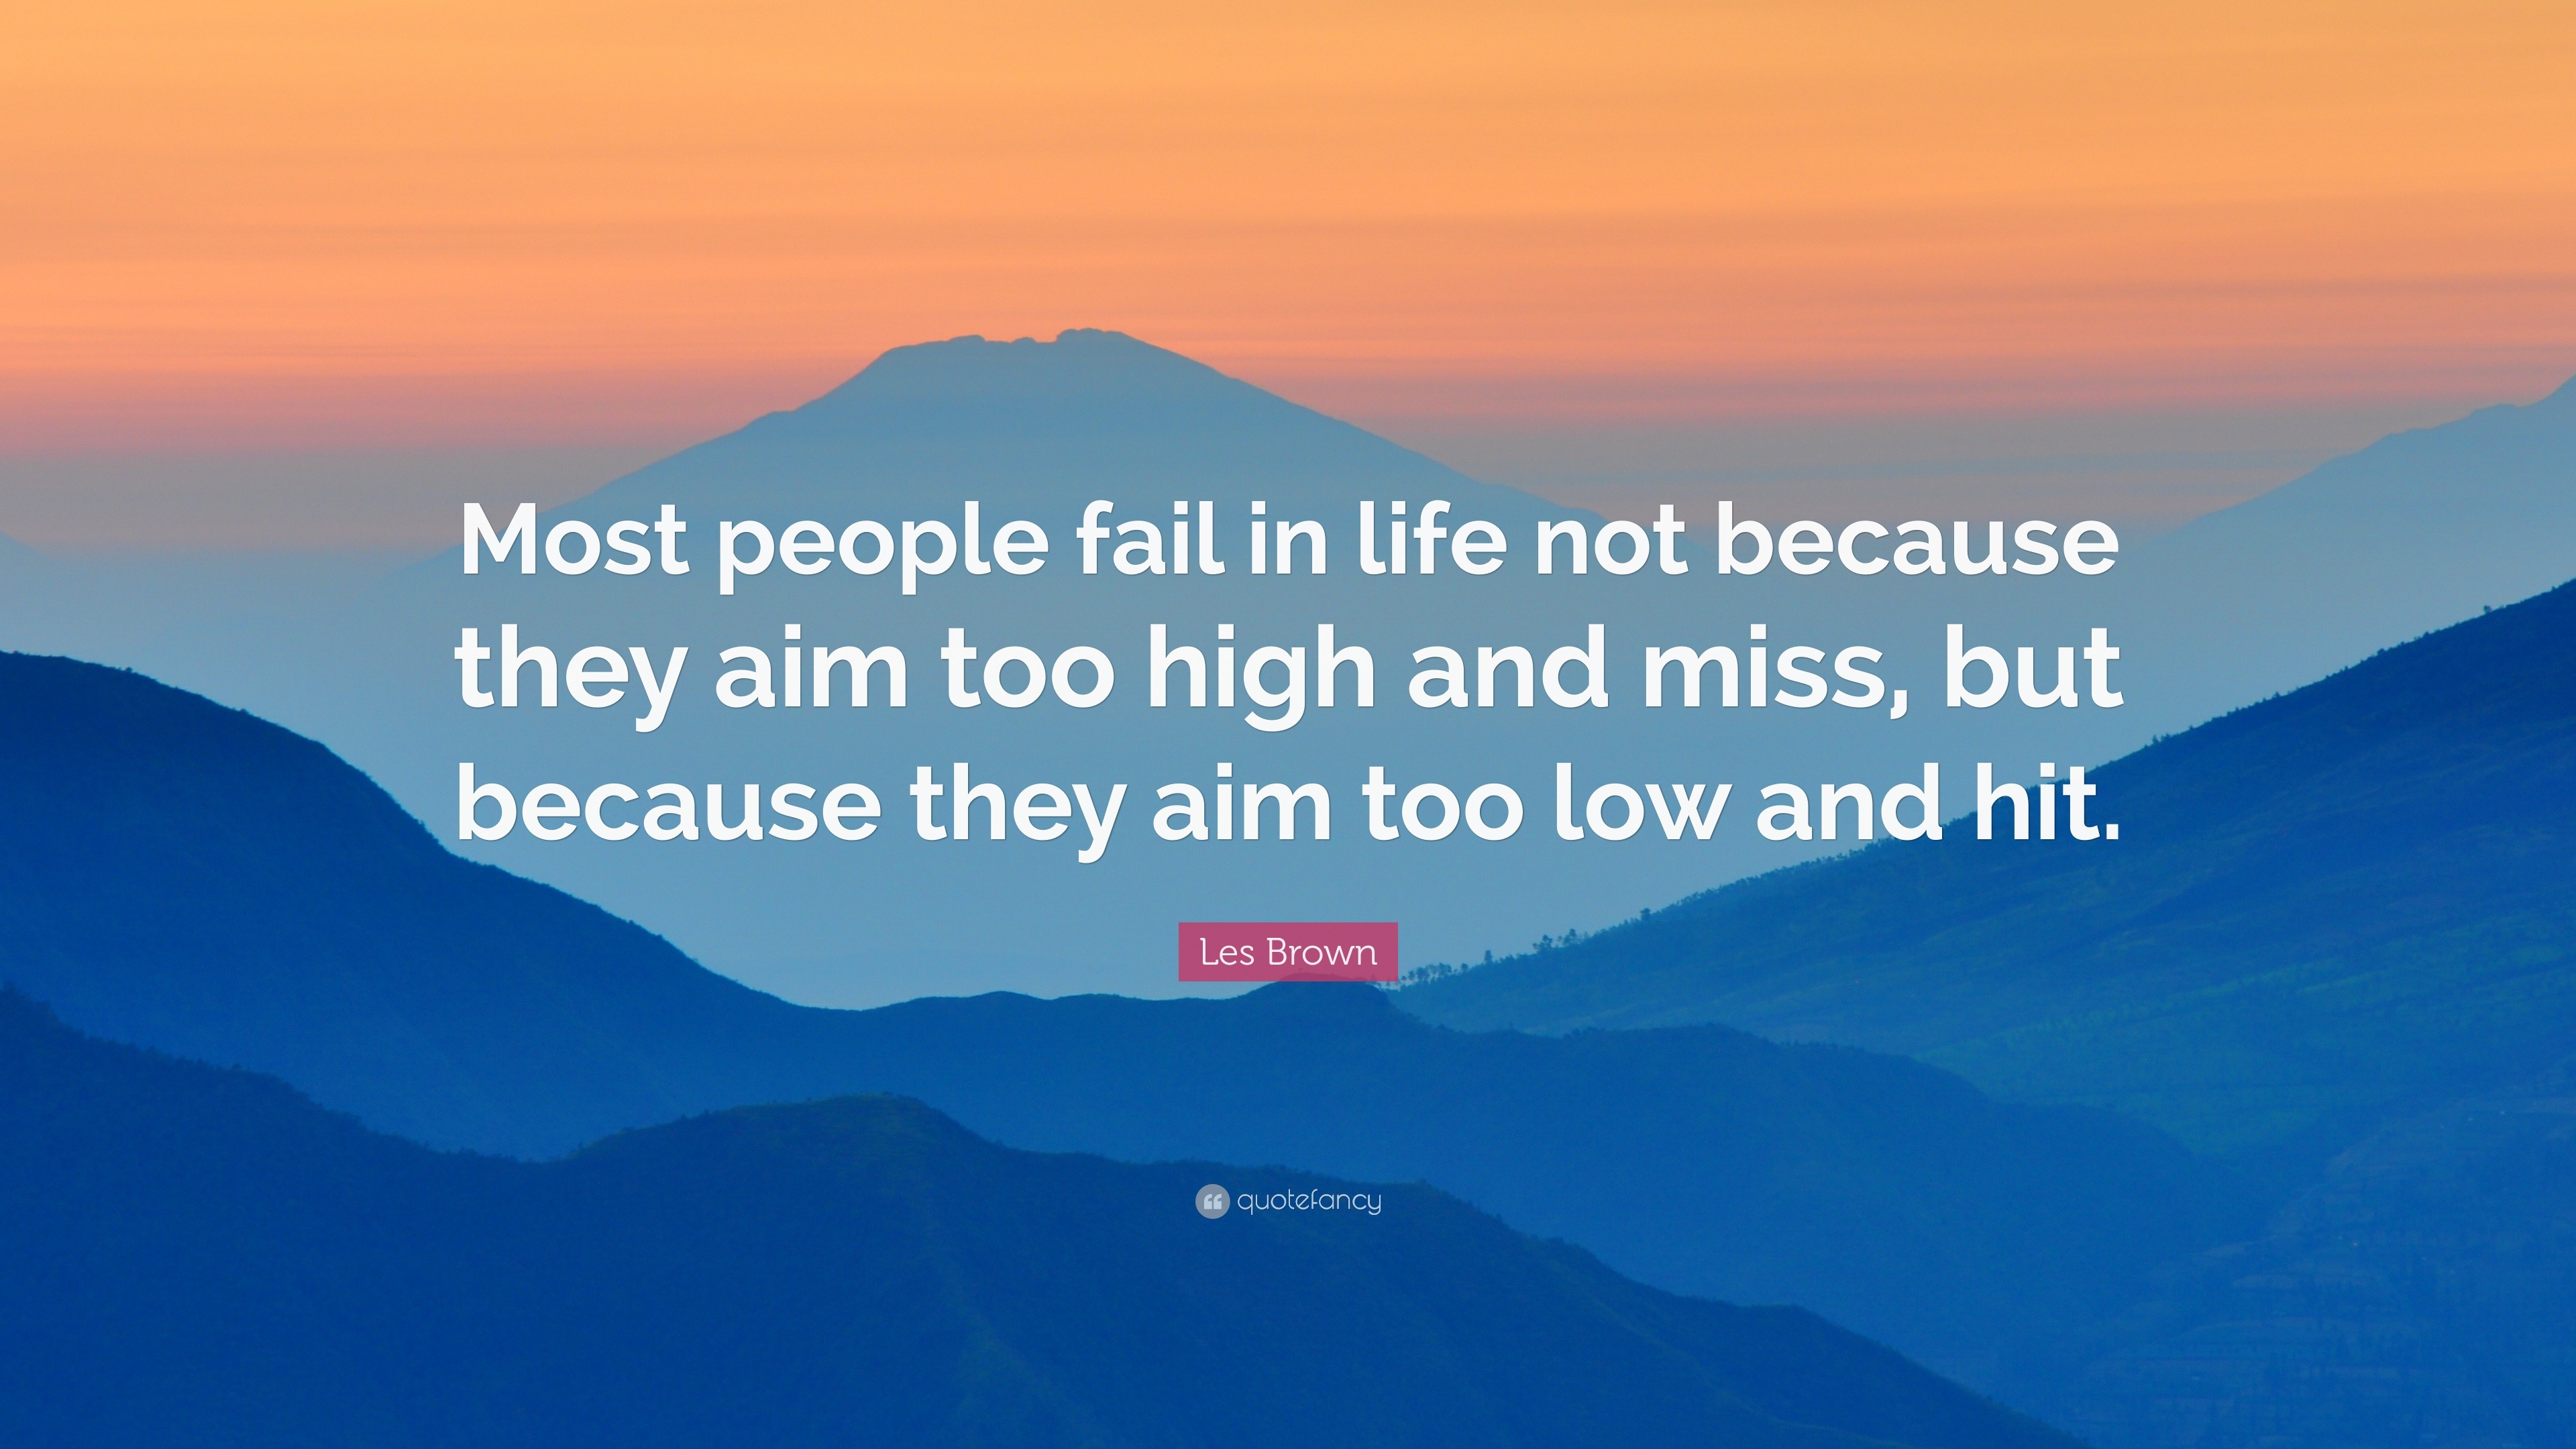 Les Brown Quote “Most people fail in life not because they aim too high